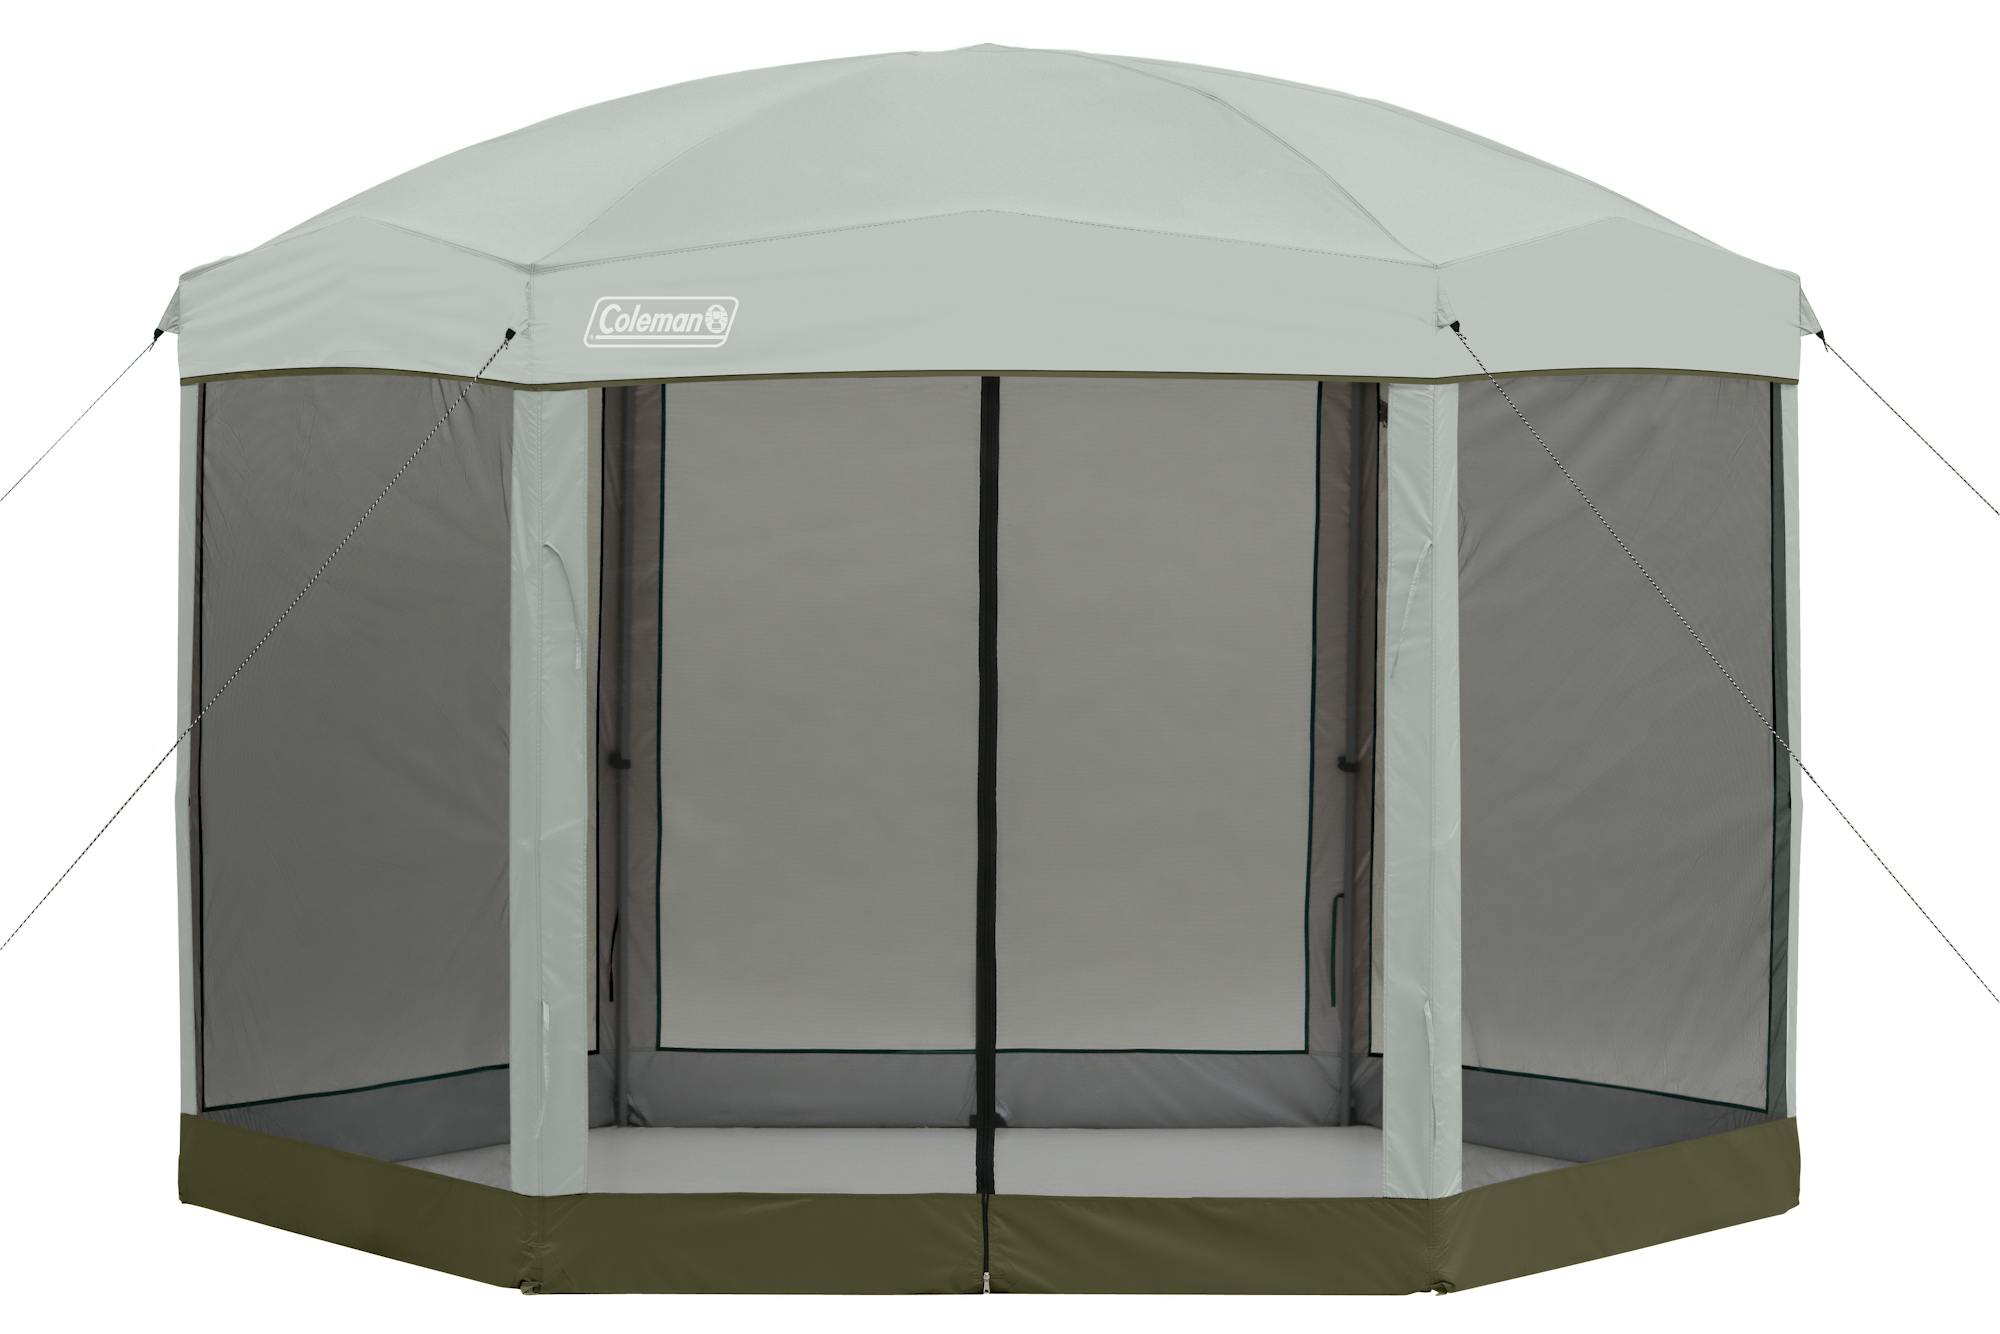 Back Home™ 12 x 10 ft. Instant Screenhouse | Coleman CA